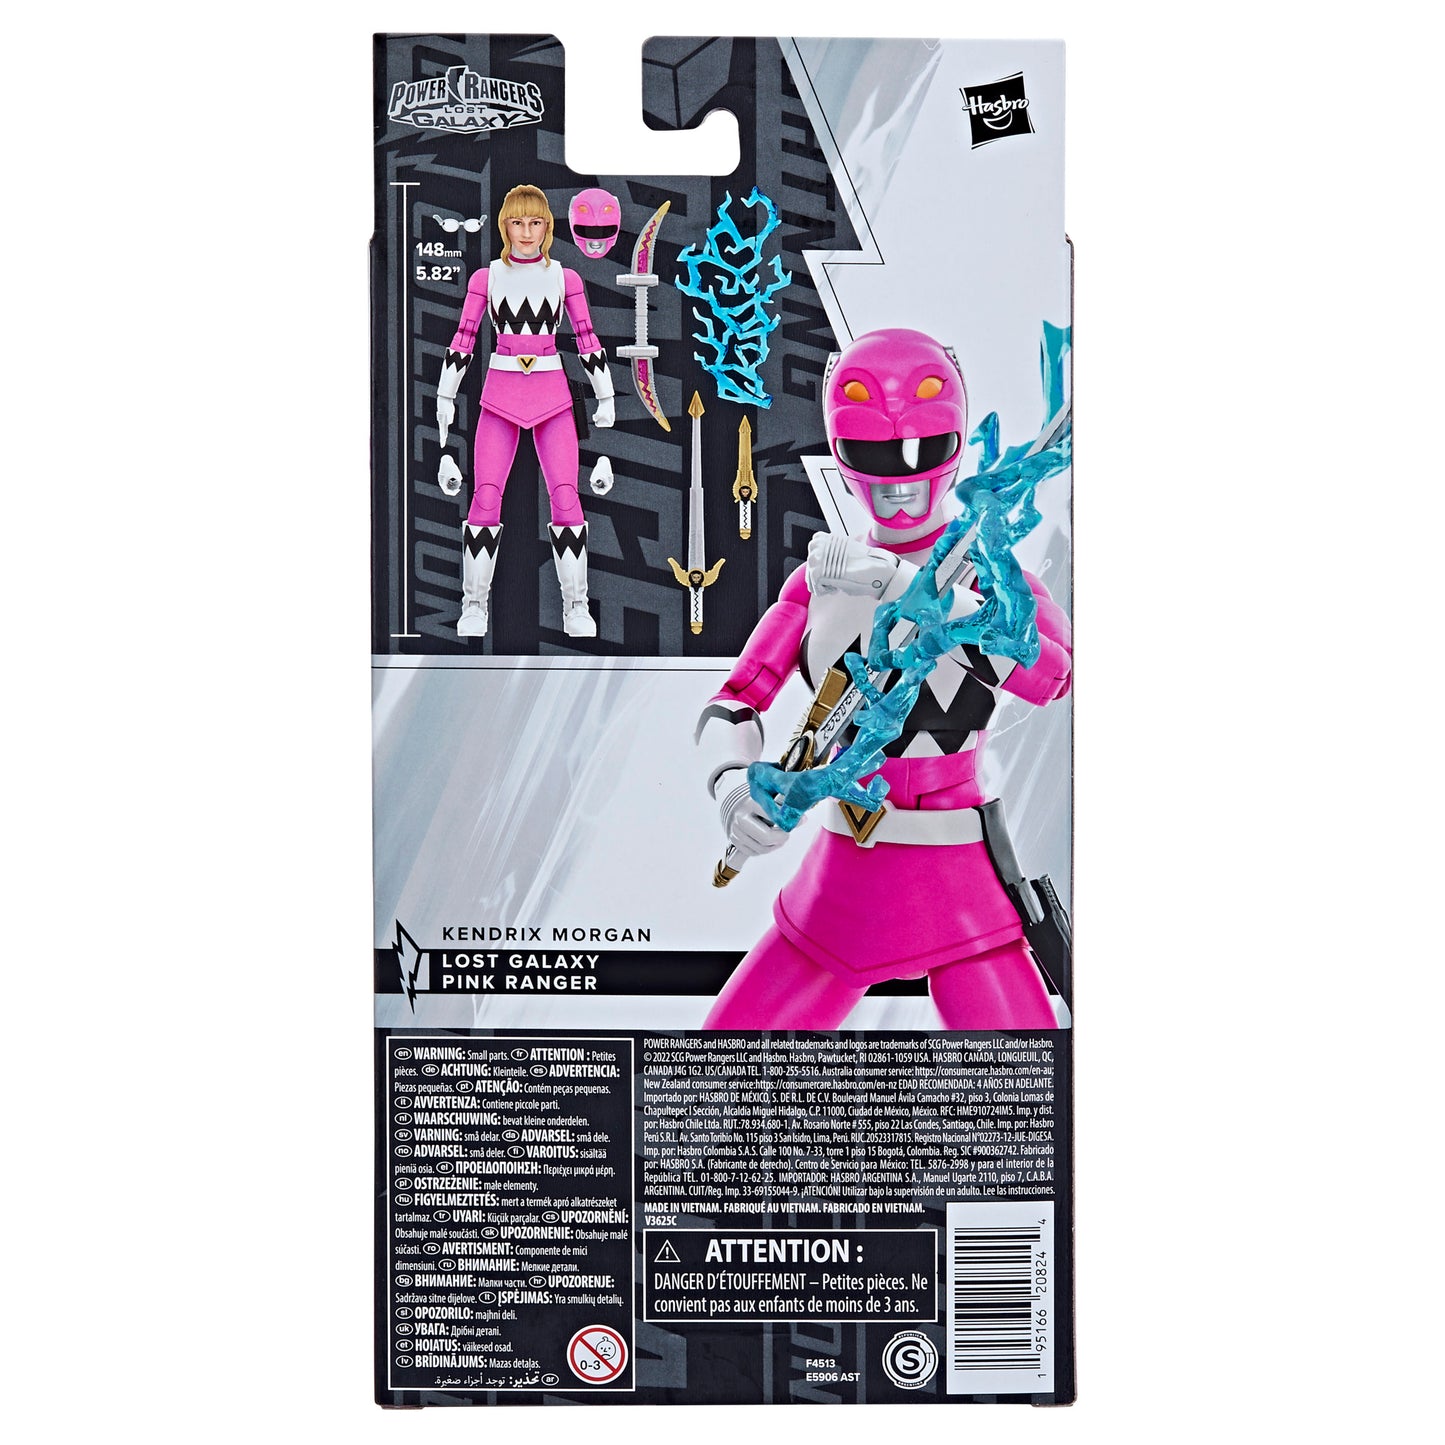 Power Rangers Lightning Collection Lost Galaxy Pink Ranger Figure Toy box back view - Heretoserveyou